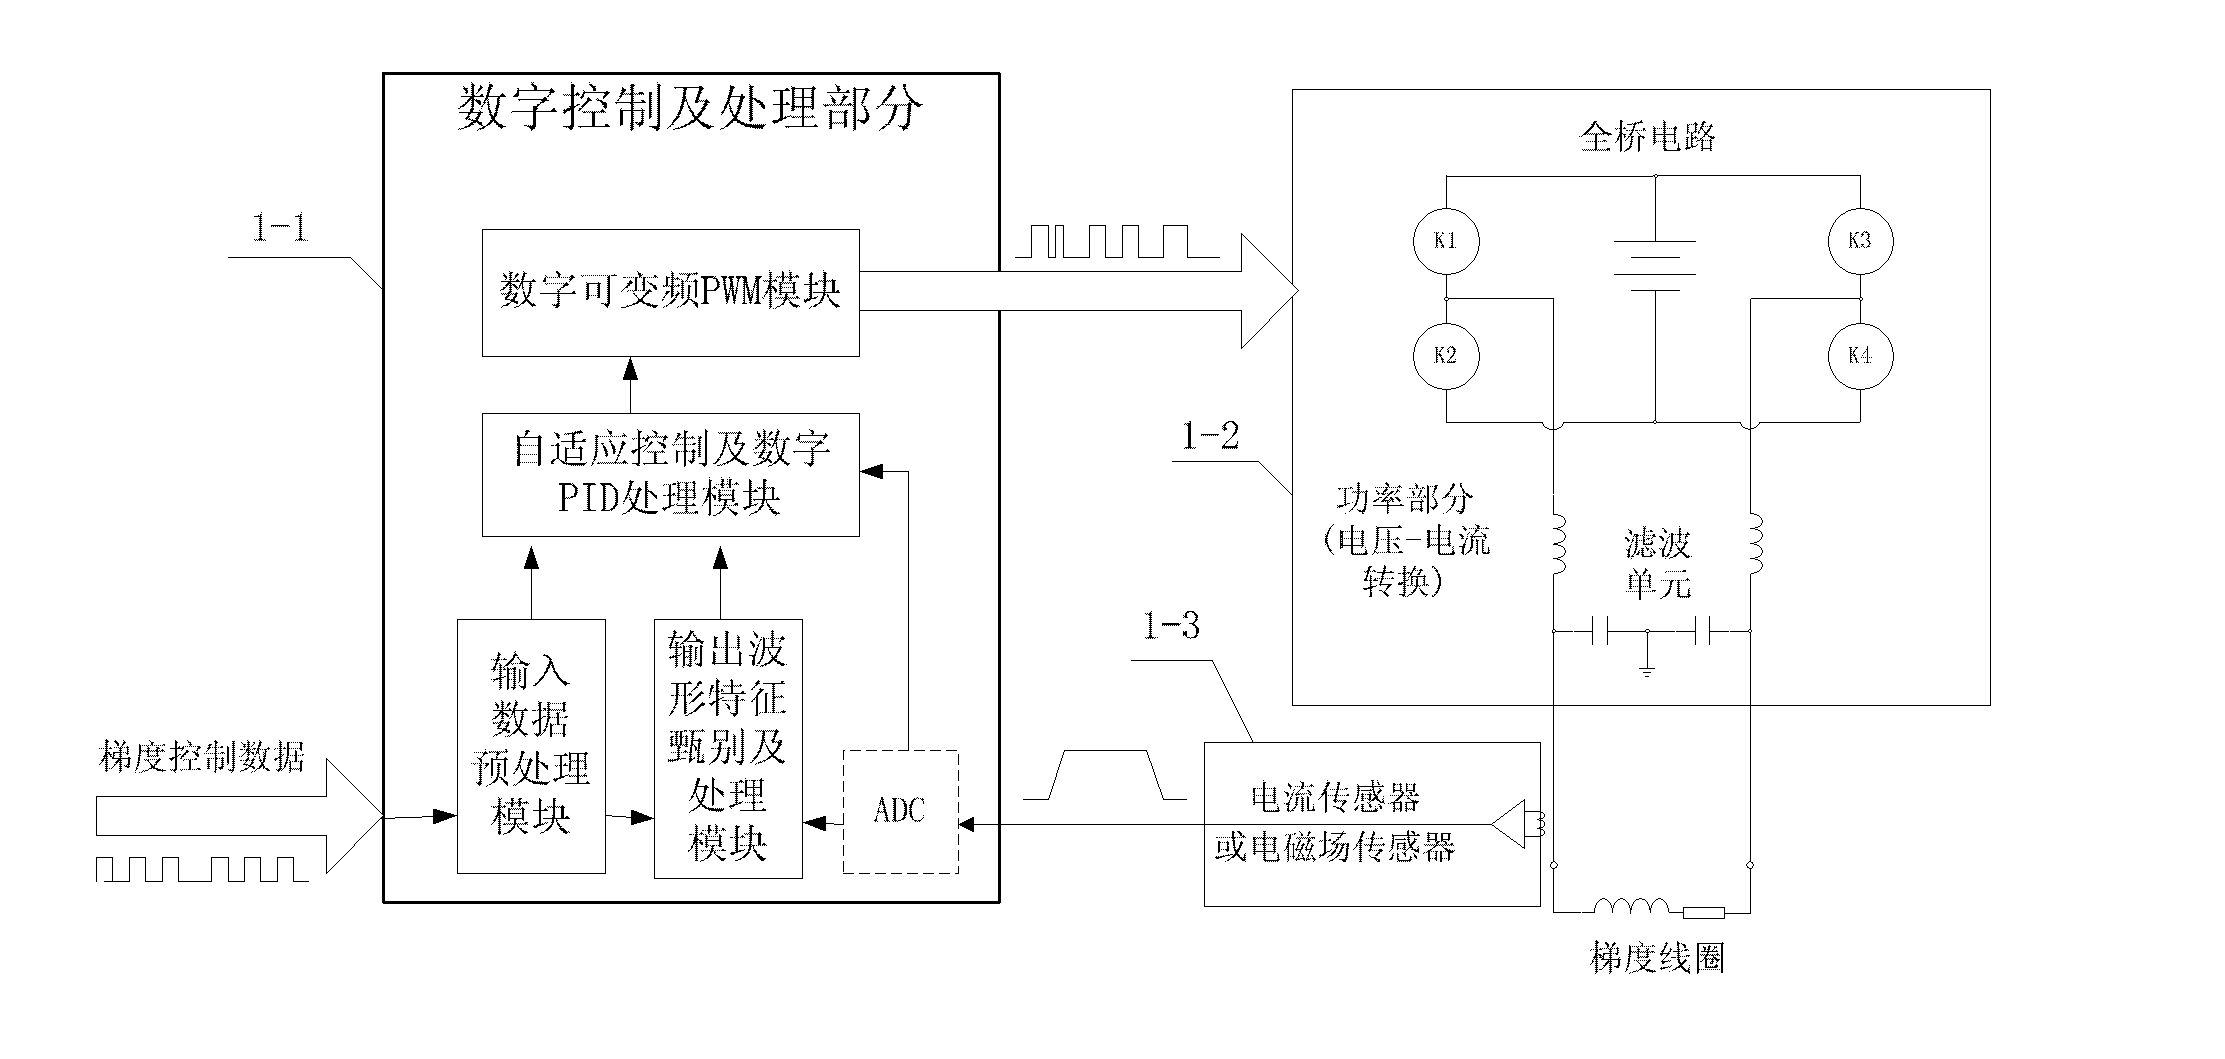 Digital variable frequency PWM (Pulse Width Modulation) gradient amplifier with adaptively-controlled load